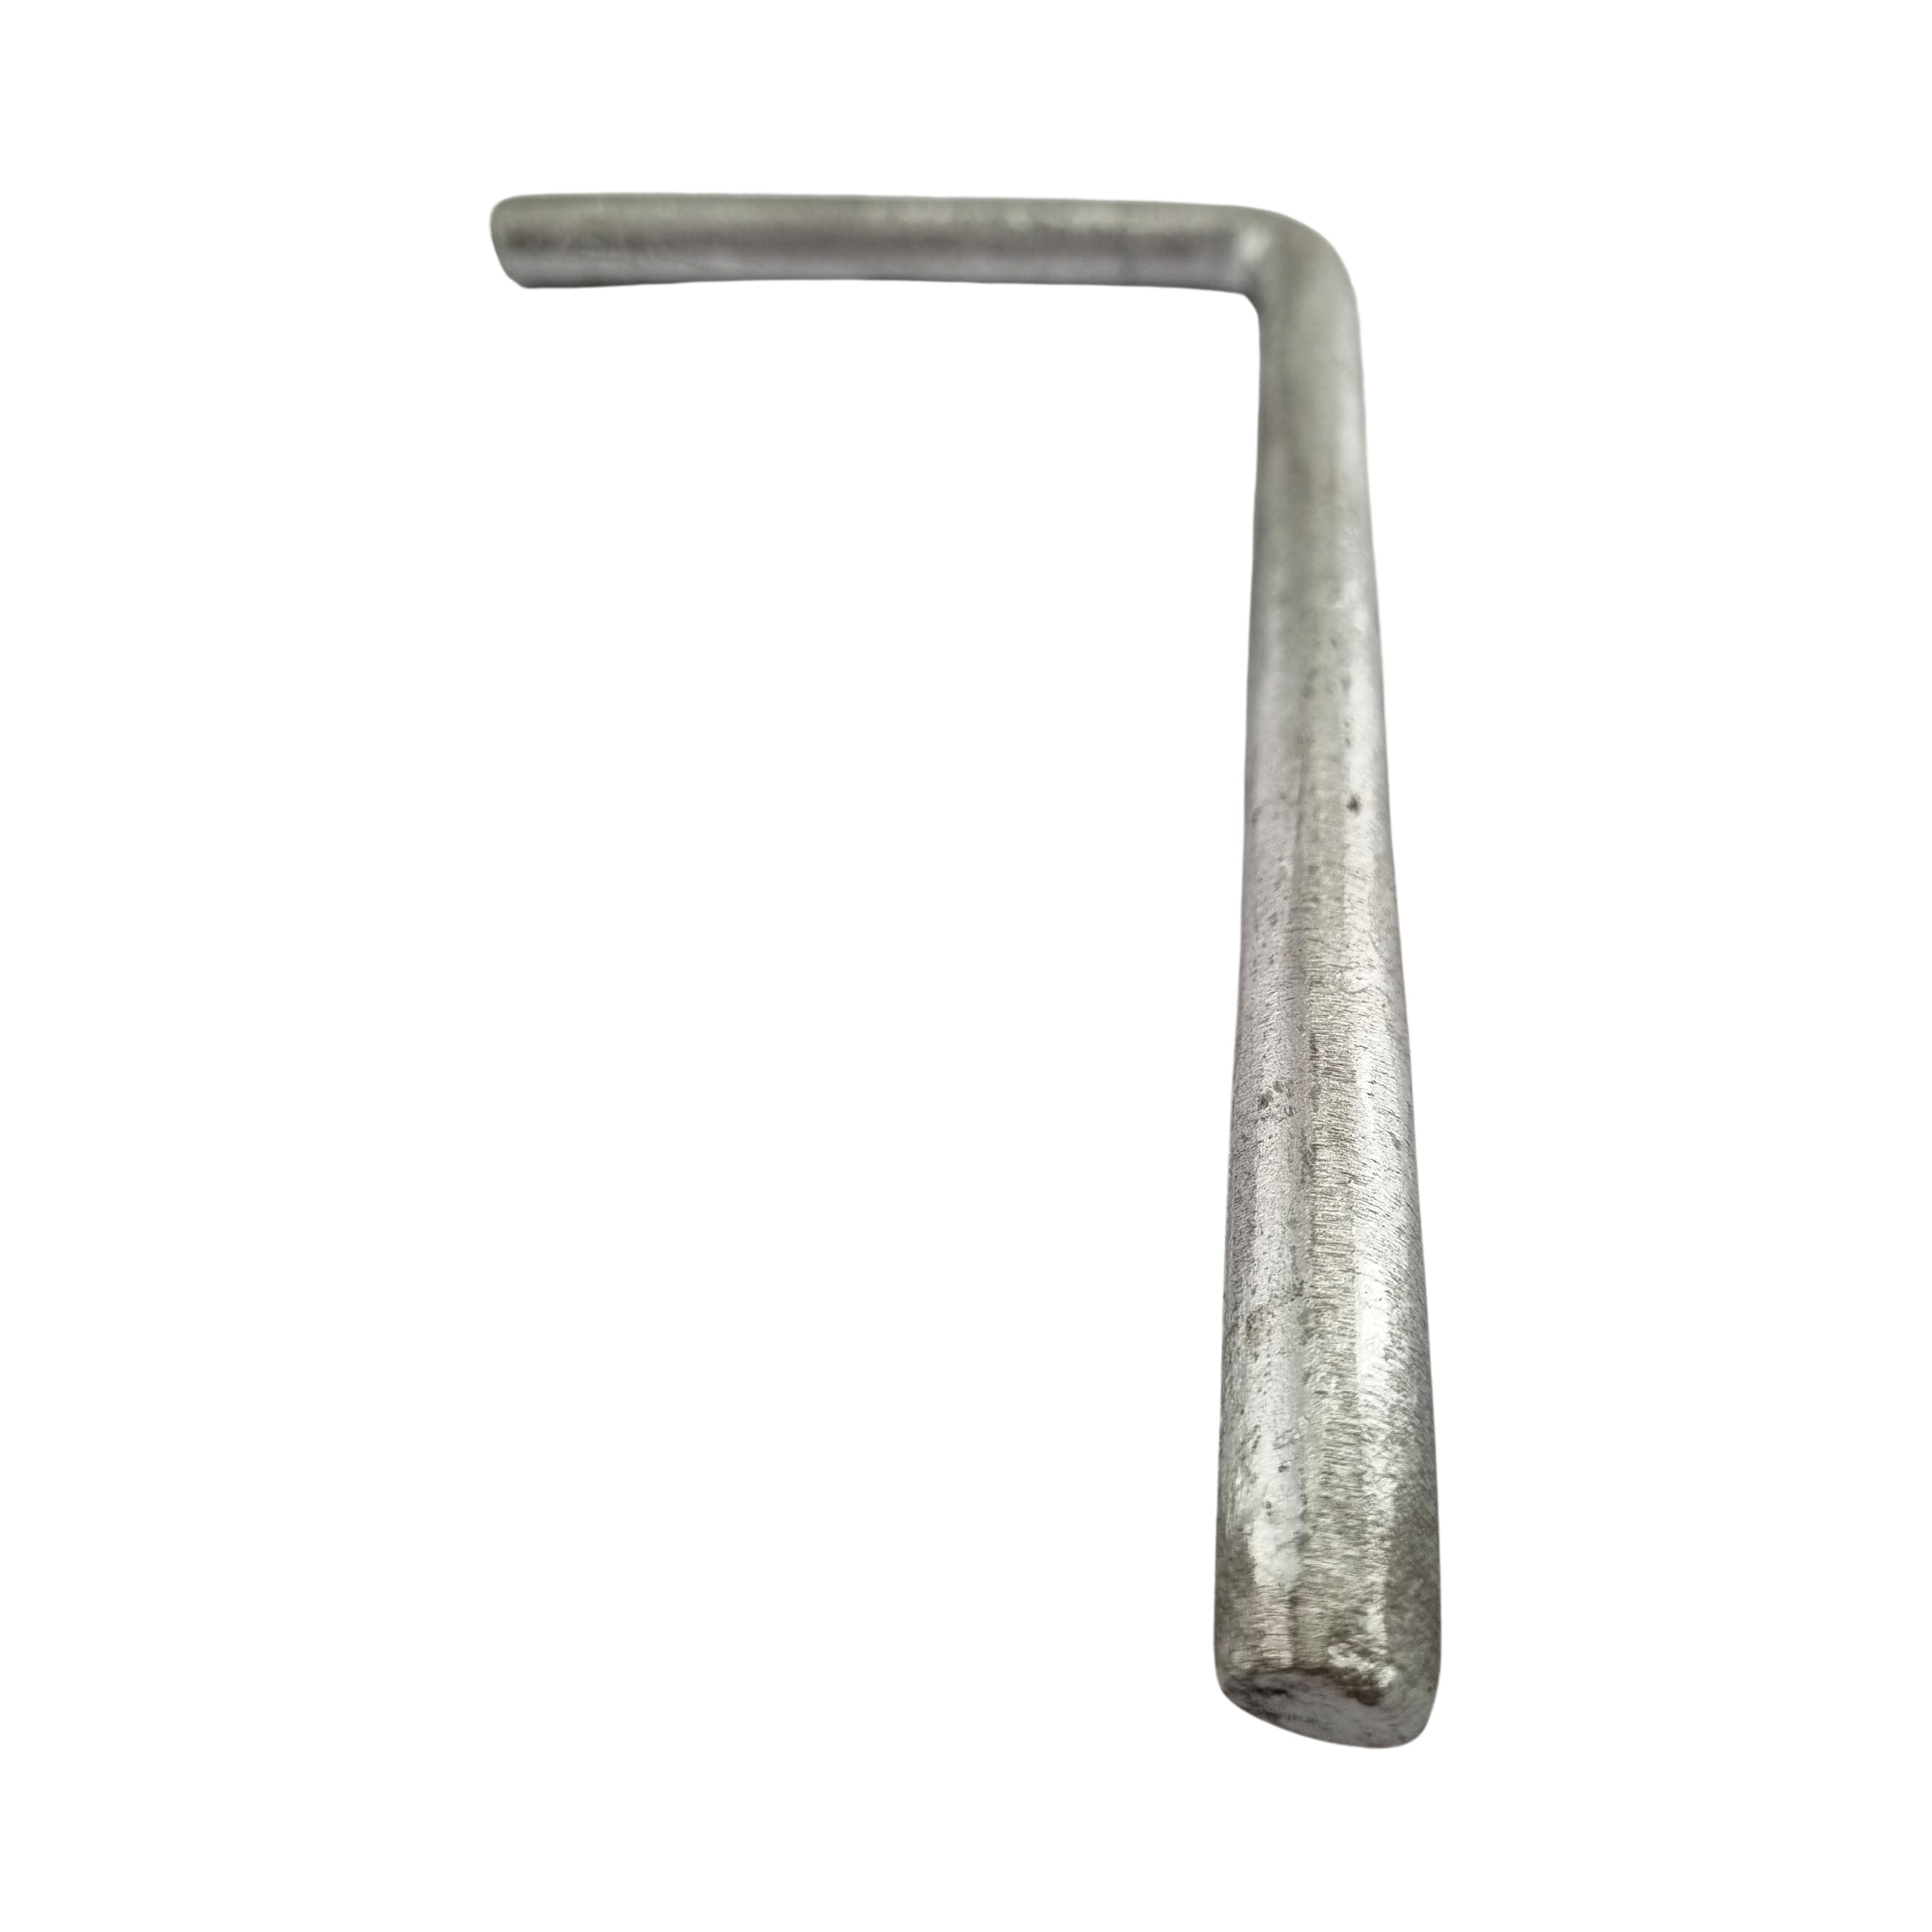 Drop Bolt - Galvanised. Various sizes. Australian Made. Australia wide shipping + Melbourne pick-up. Shop Fence and Gate Fittings: Chain.com.au